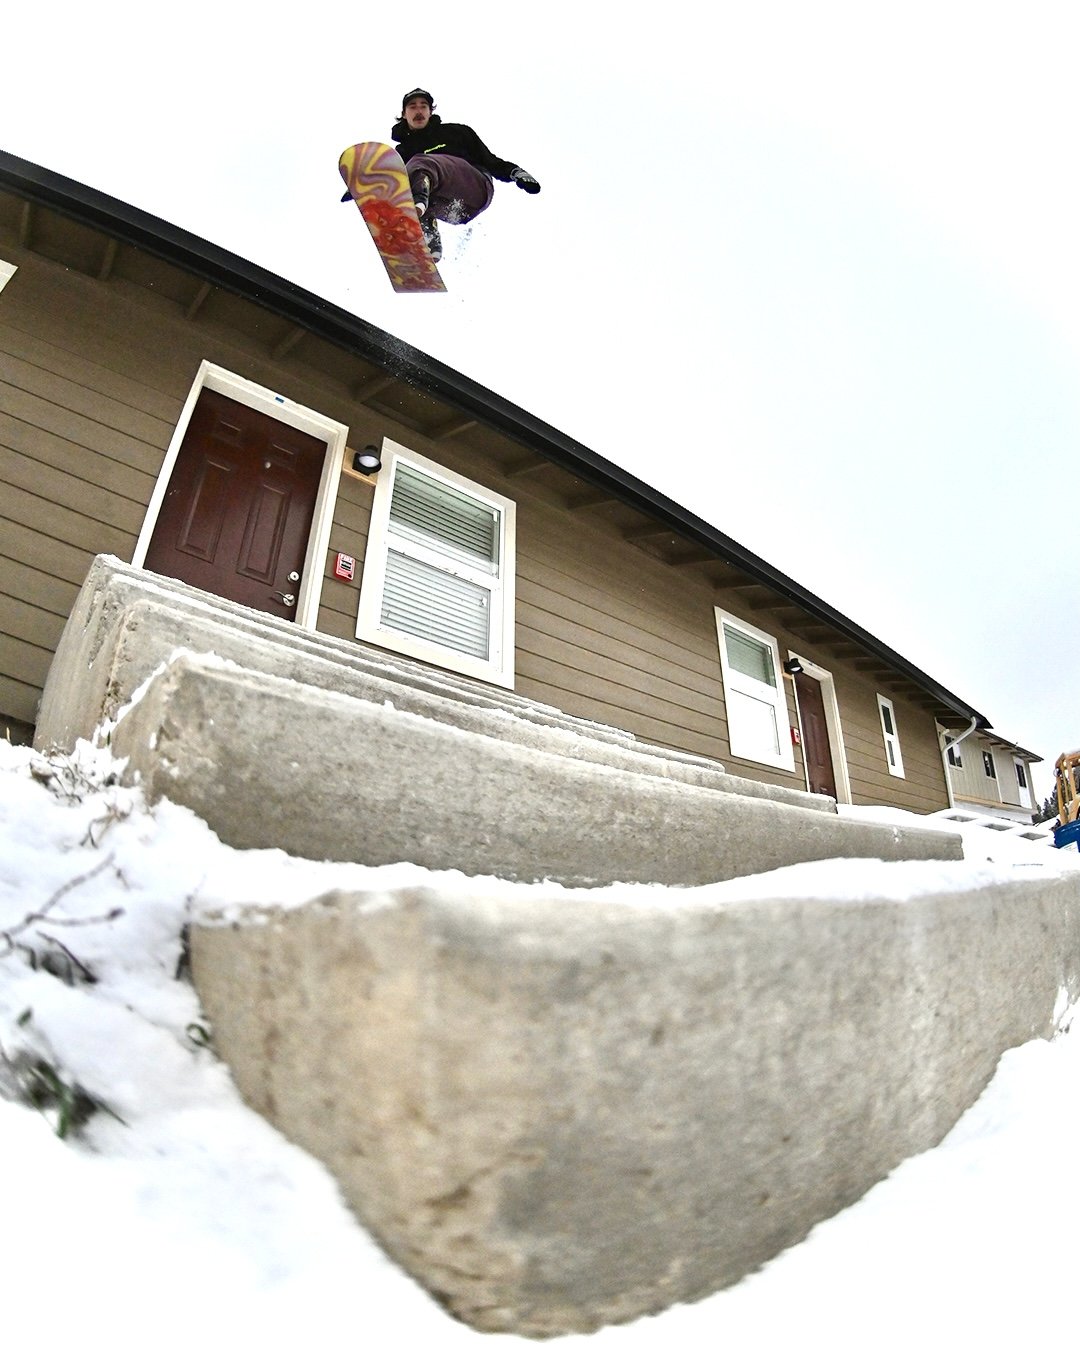  Ben Hayden with a back shifty off the roof and onto the 5-stair… 